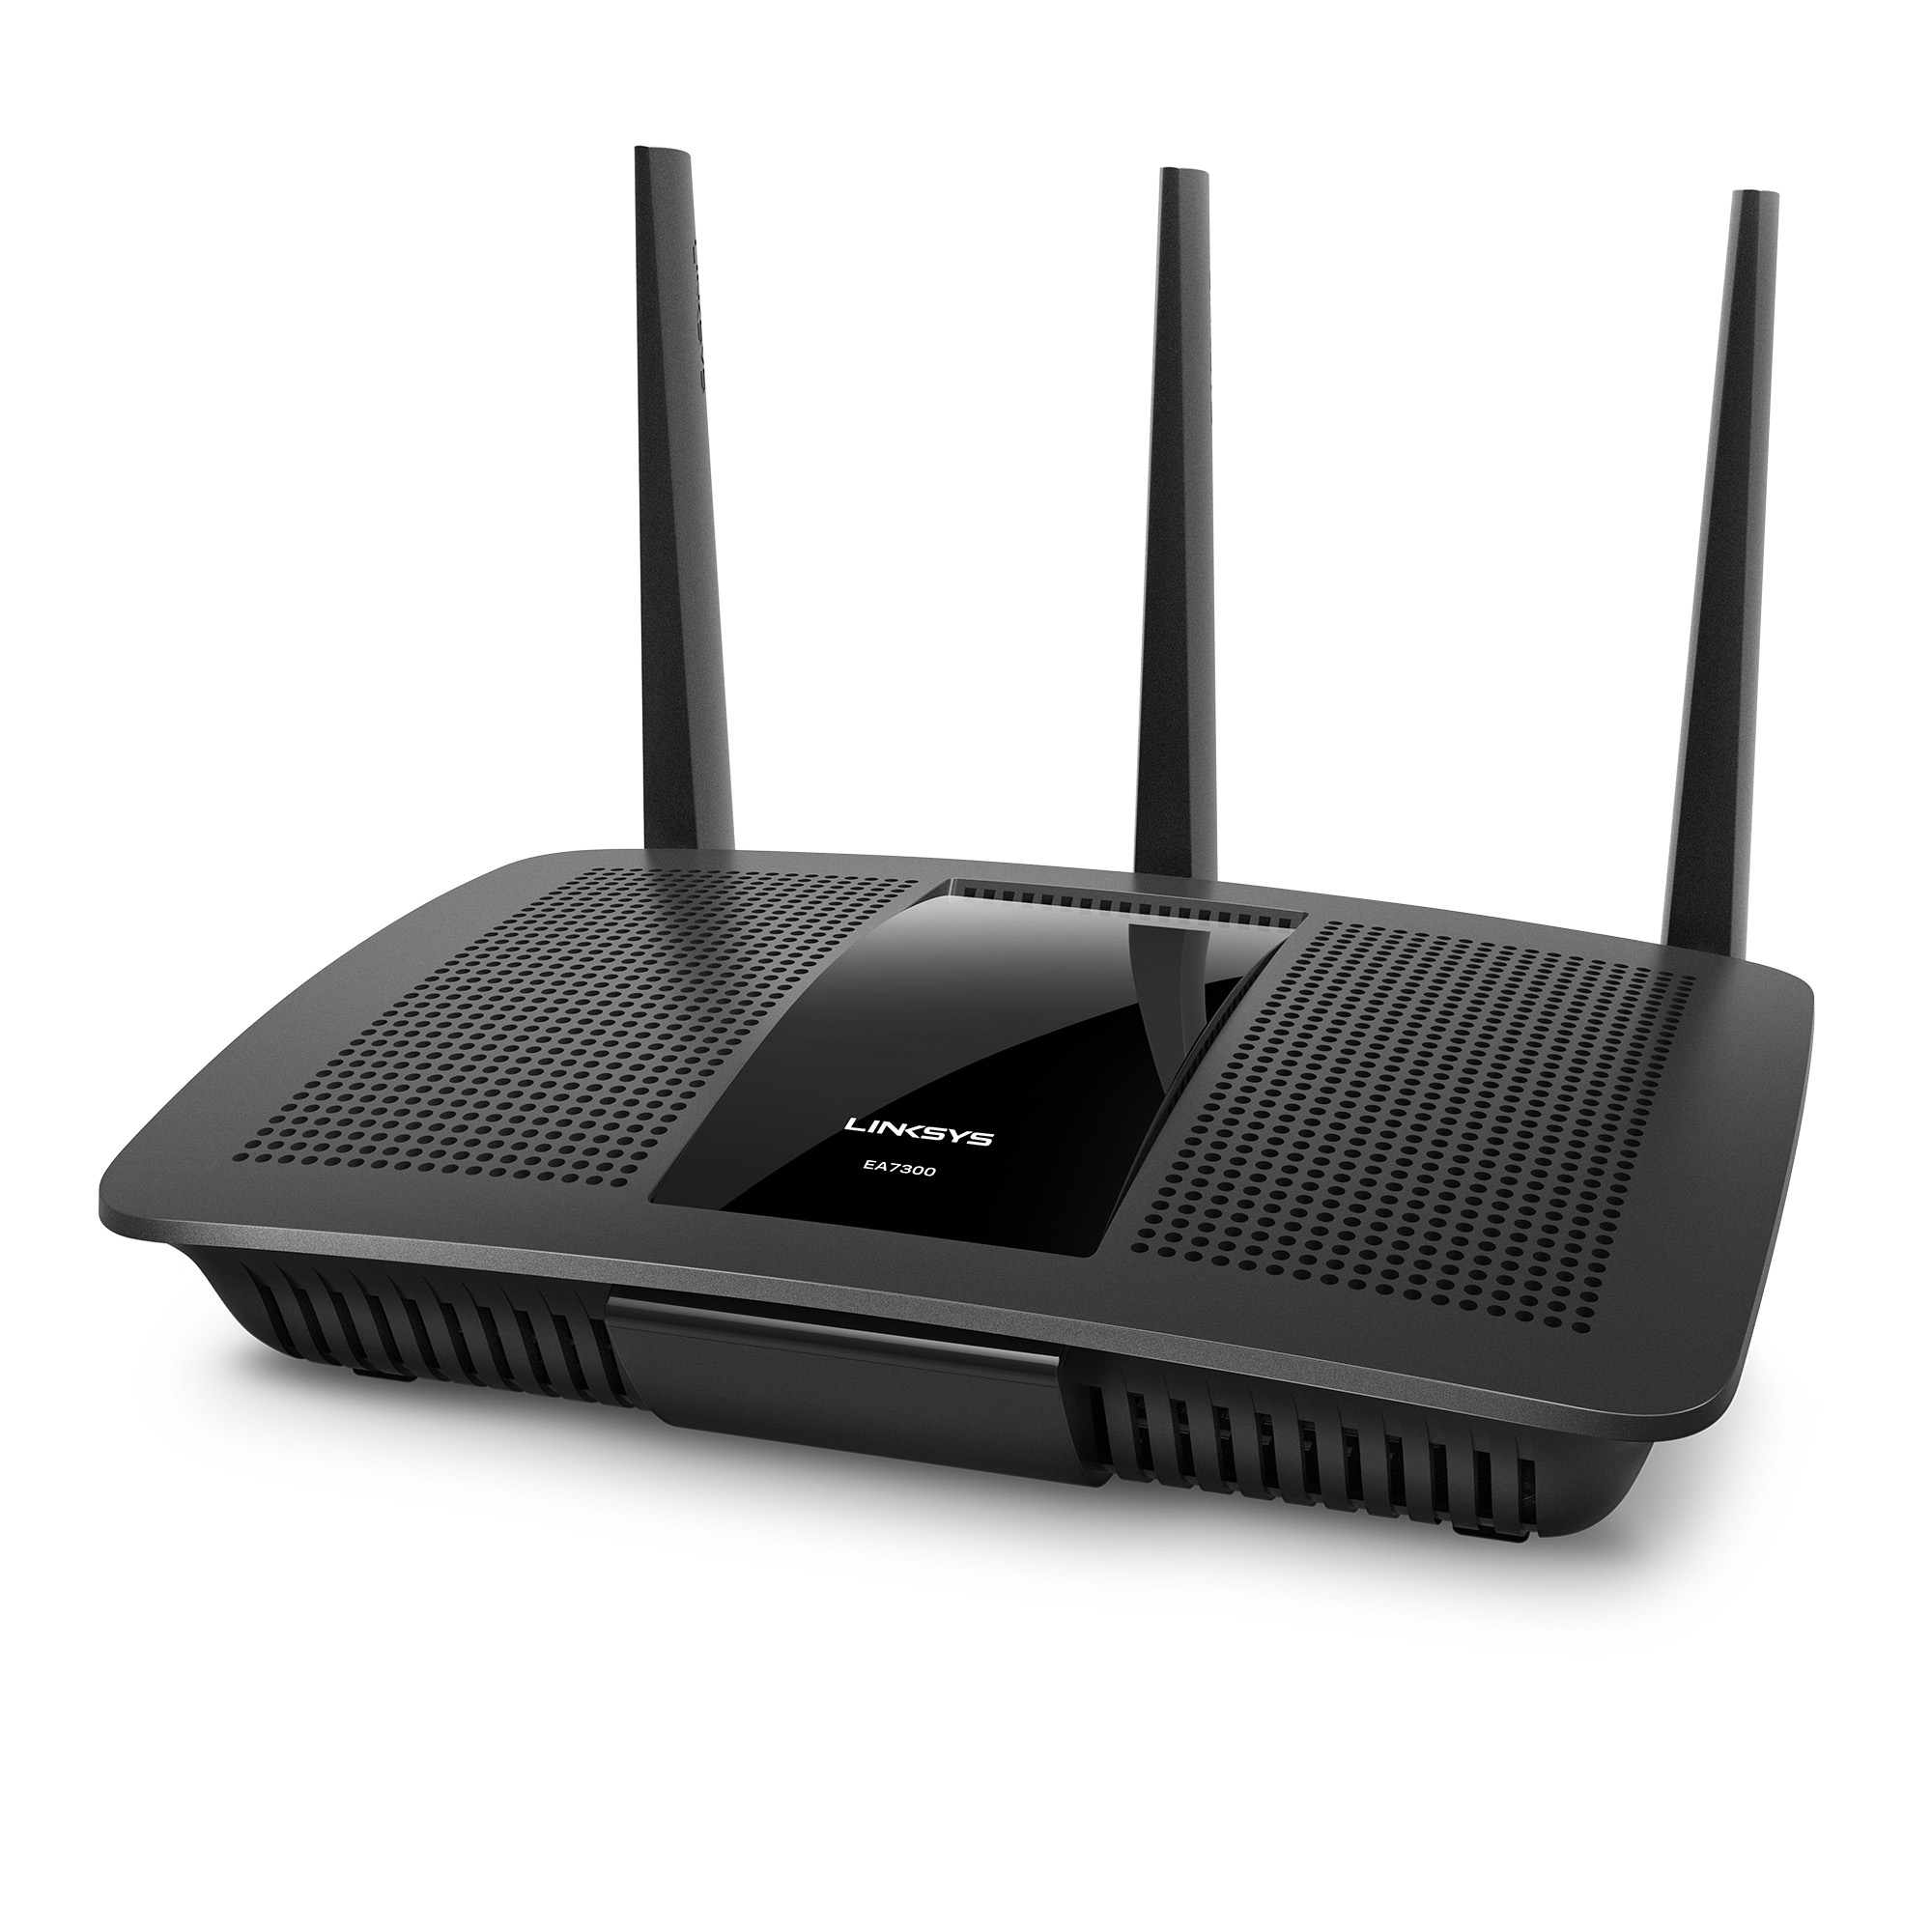 Linksys MAX-STREAM AC1750 Router features MU-MIMO by Belkin International, Inc.